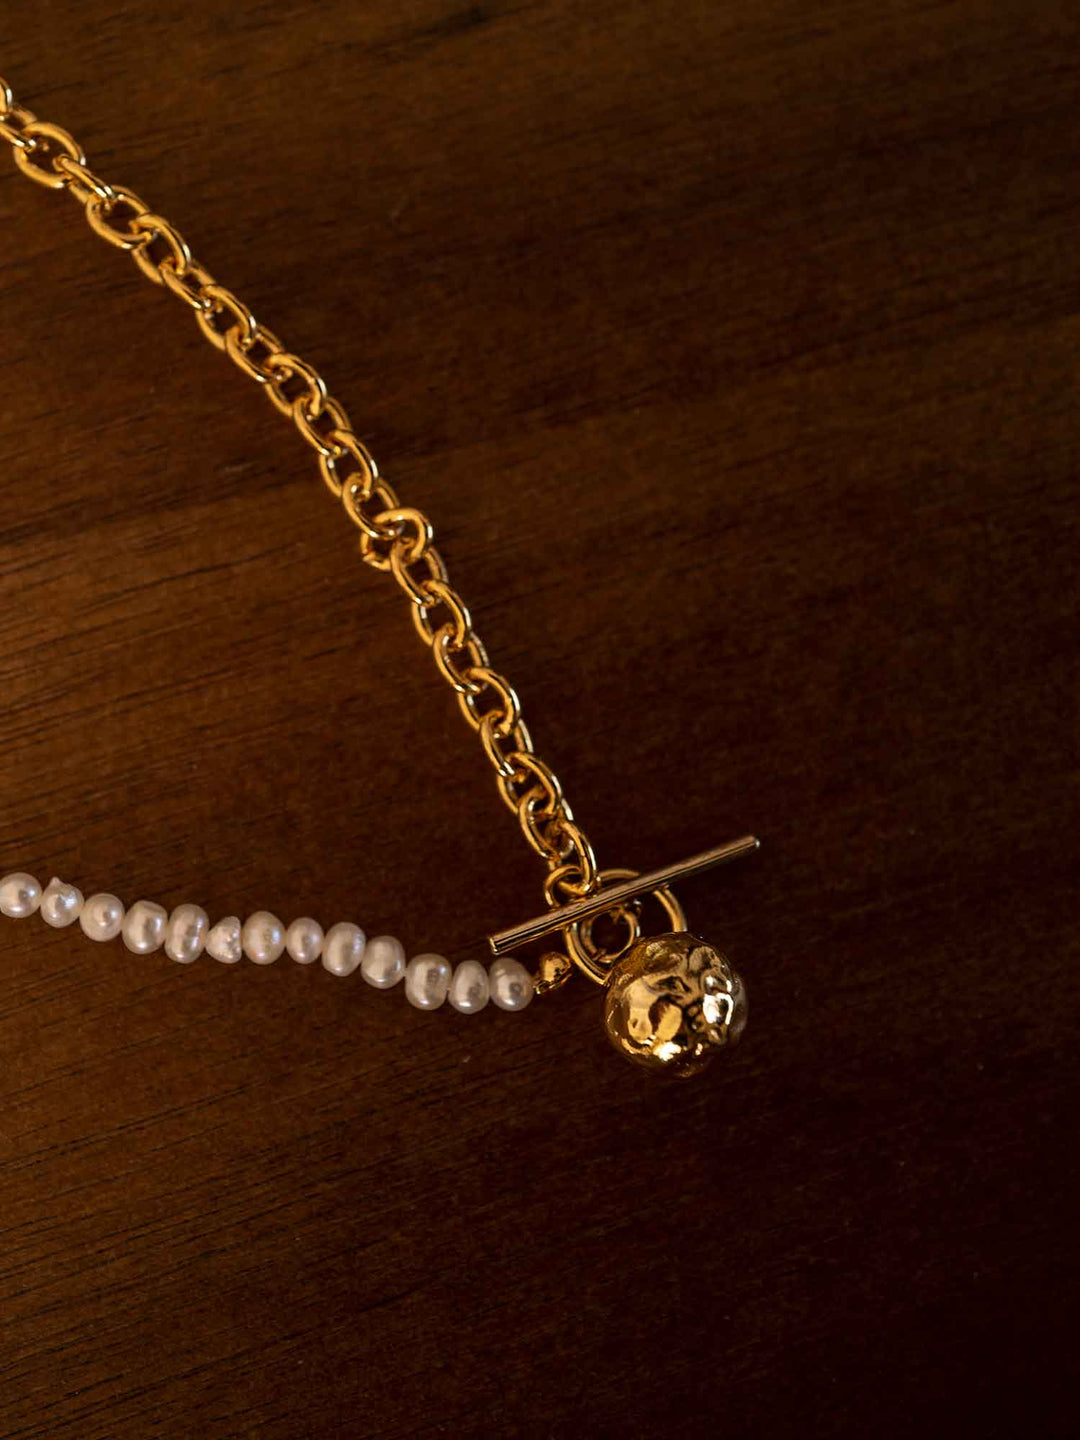 A golden pearl necklace with a round meteorite pendant